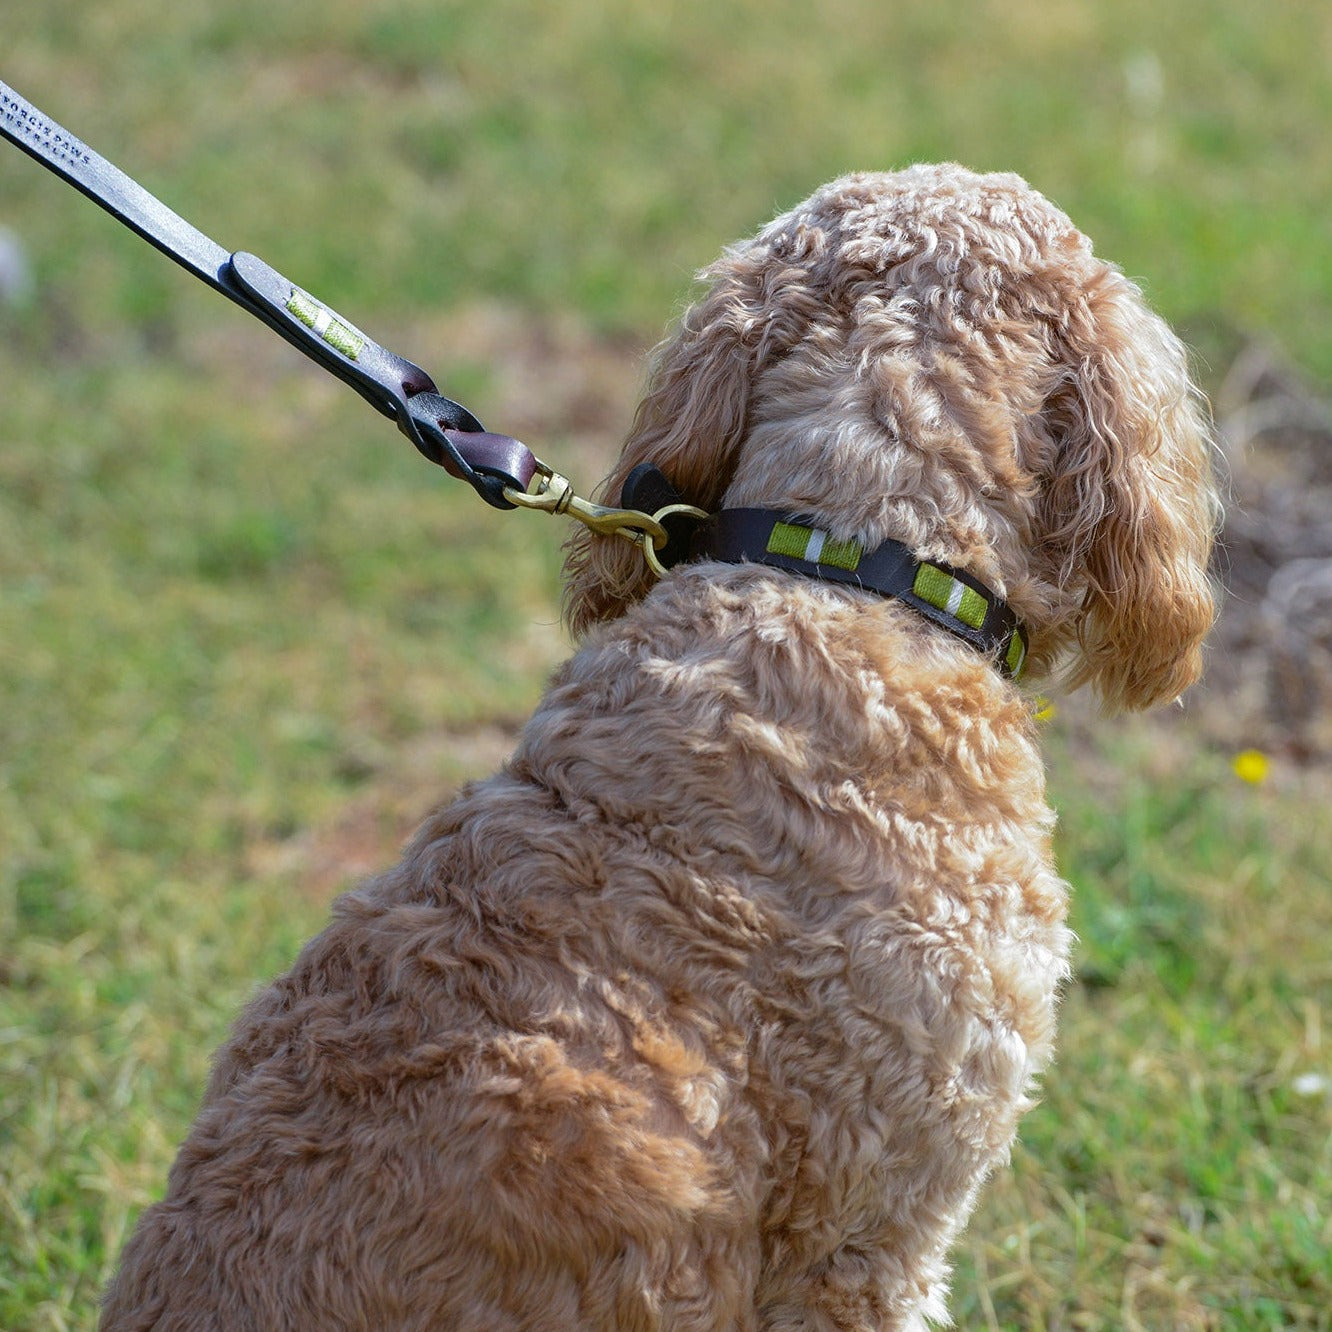 A curly-coated brown dog sits in a grassy field, gazing into the distance, with a leash attached to its Polo Collar Locker- Mantis collar by Georgie Paws, suggesting a pause during a walk.